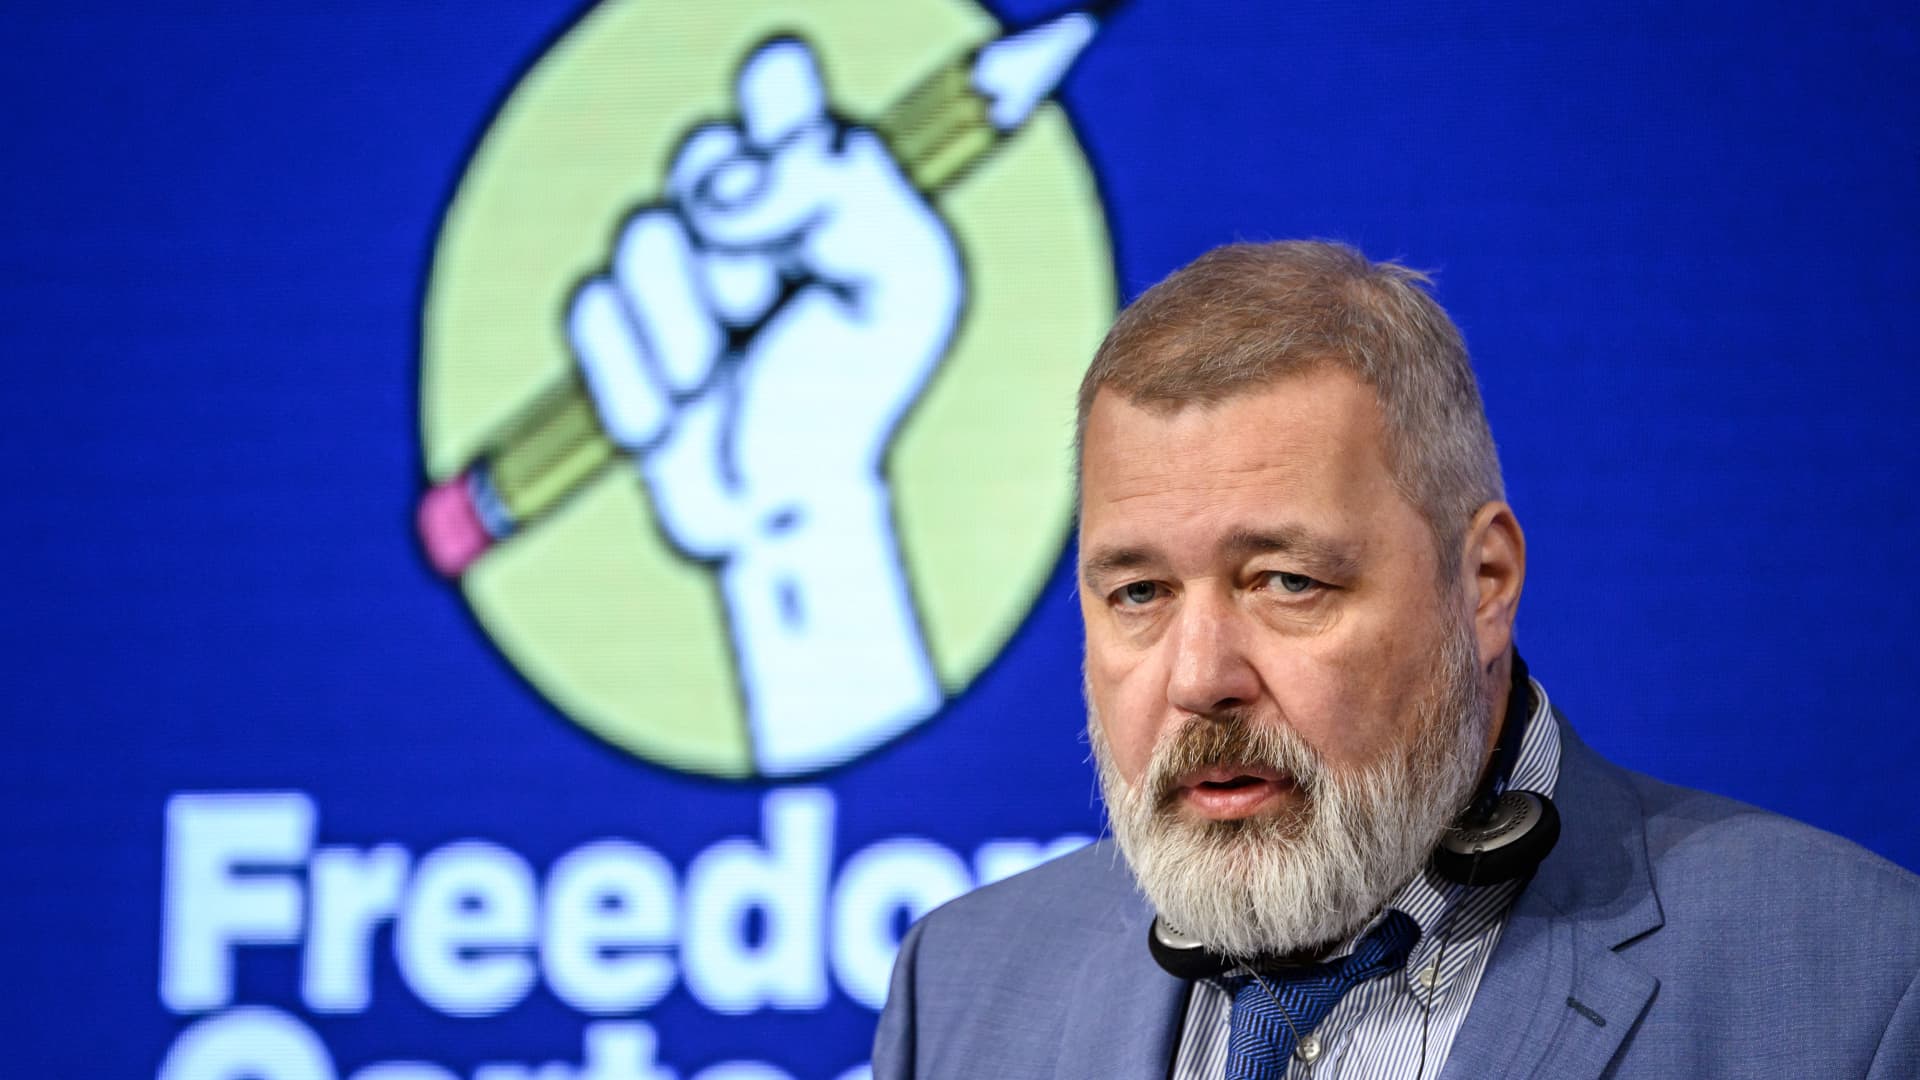 2021 Nobel Peace Prize laureate Dmitry Muratov gives a speech at the Cartooning Award Ceremony during the World Press Freedom Day in Geneva on May 3, 2022.